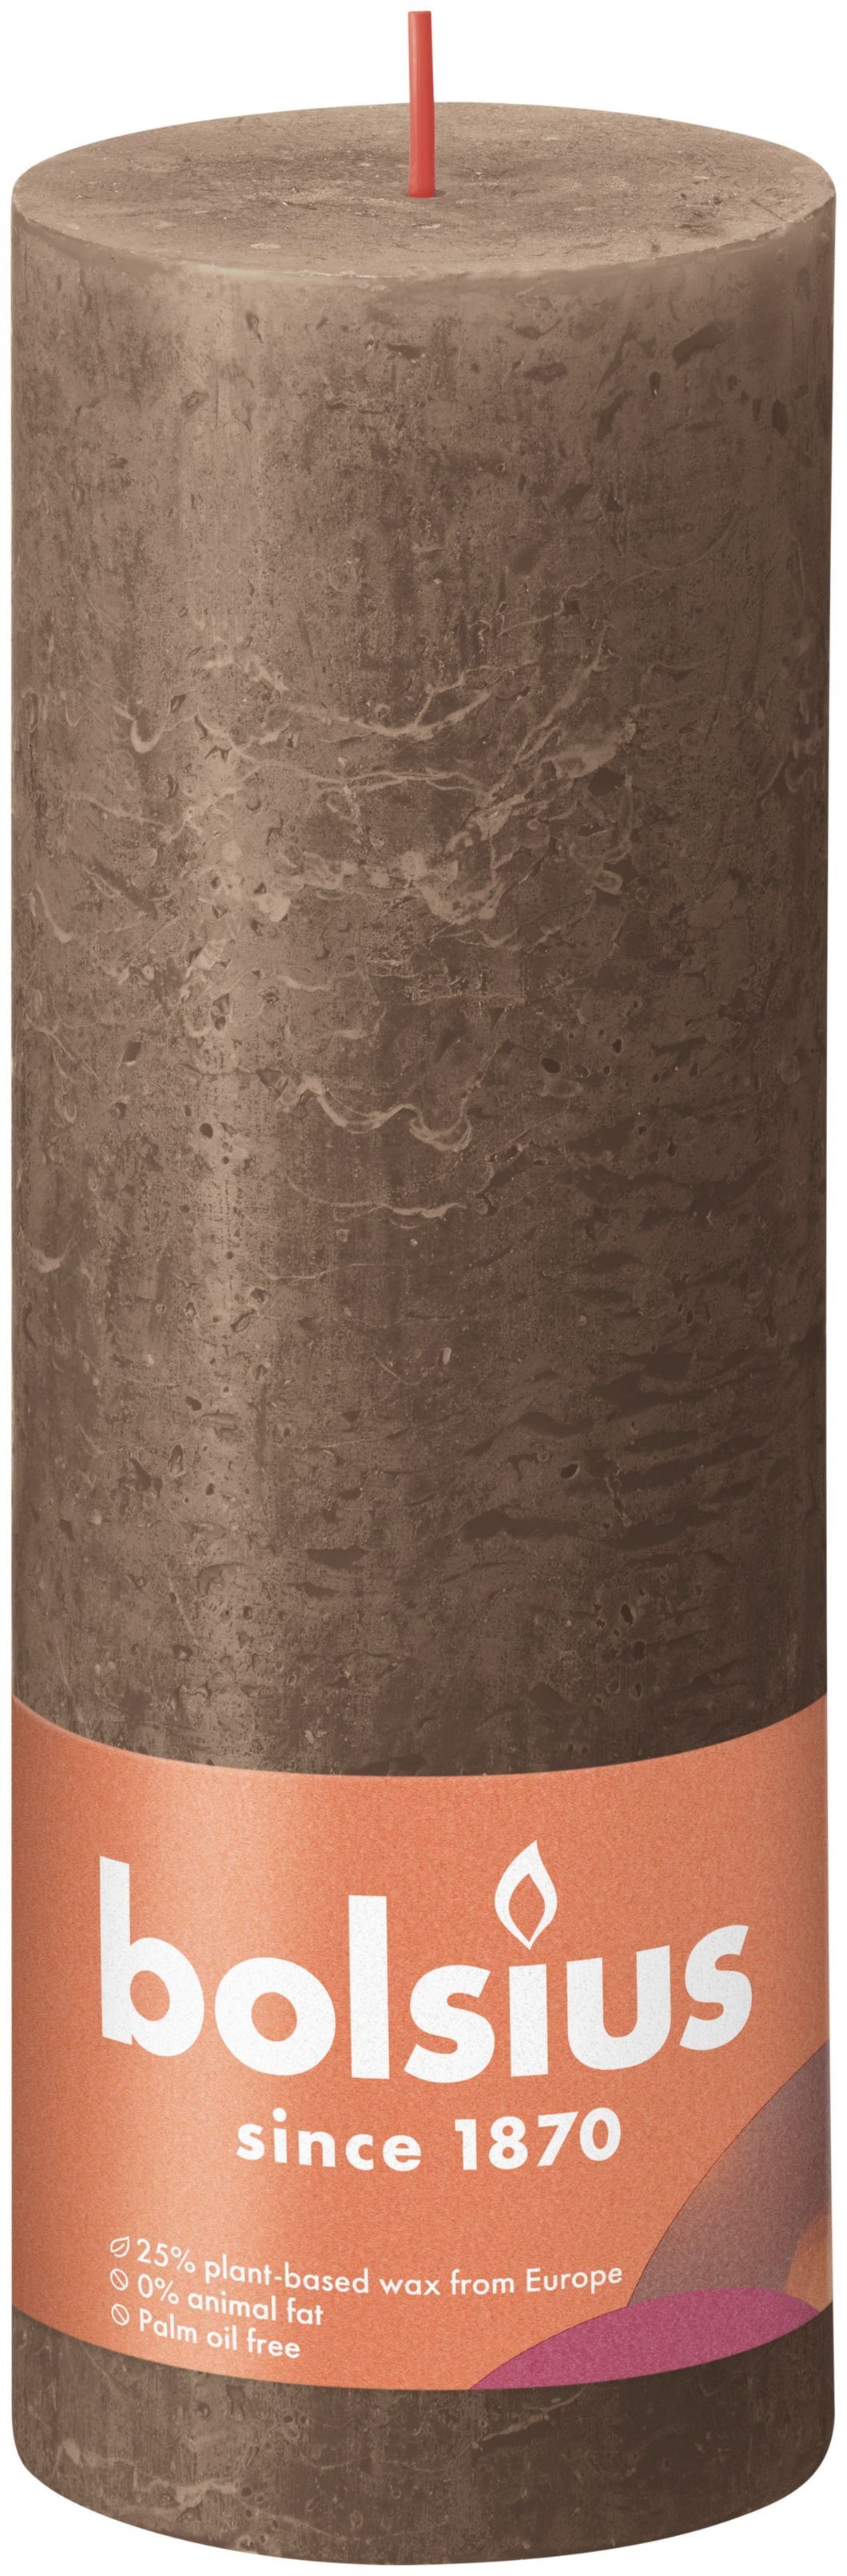 Bolsius Large Rustic Pillar Candle, Suede Brown - 190/68mm